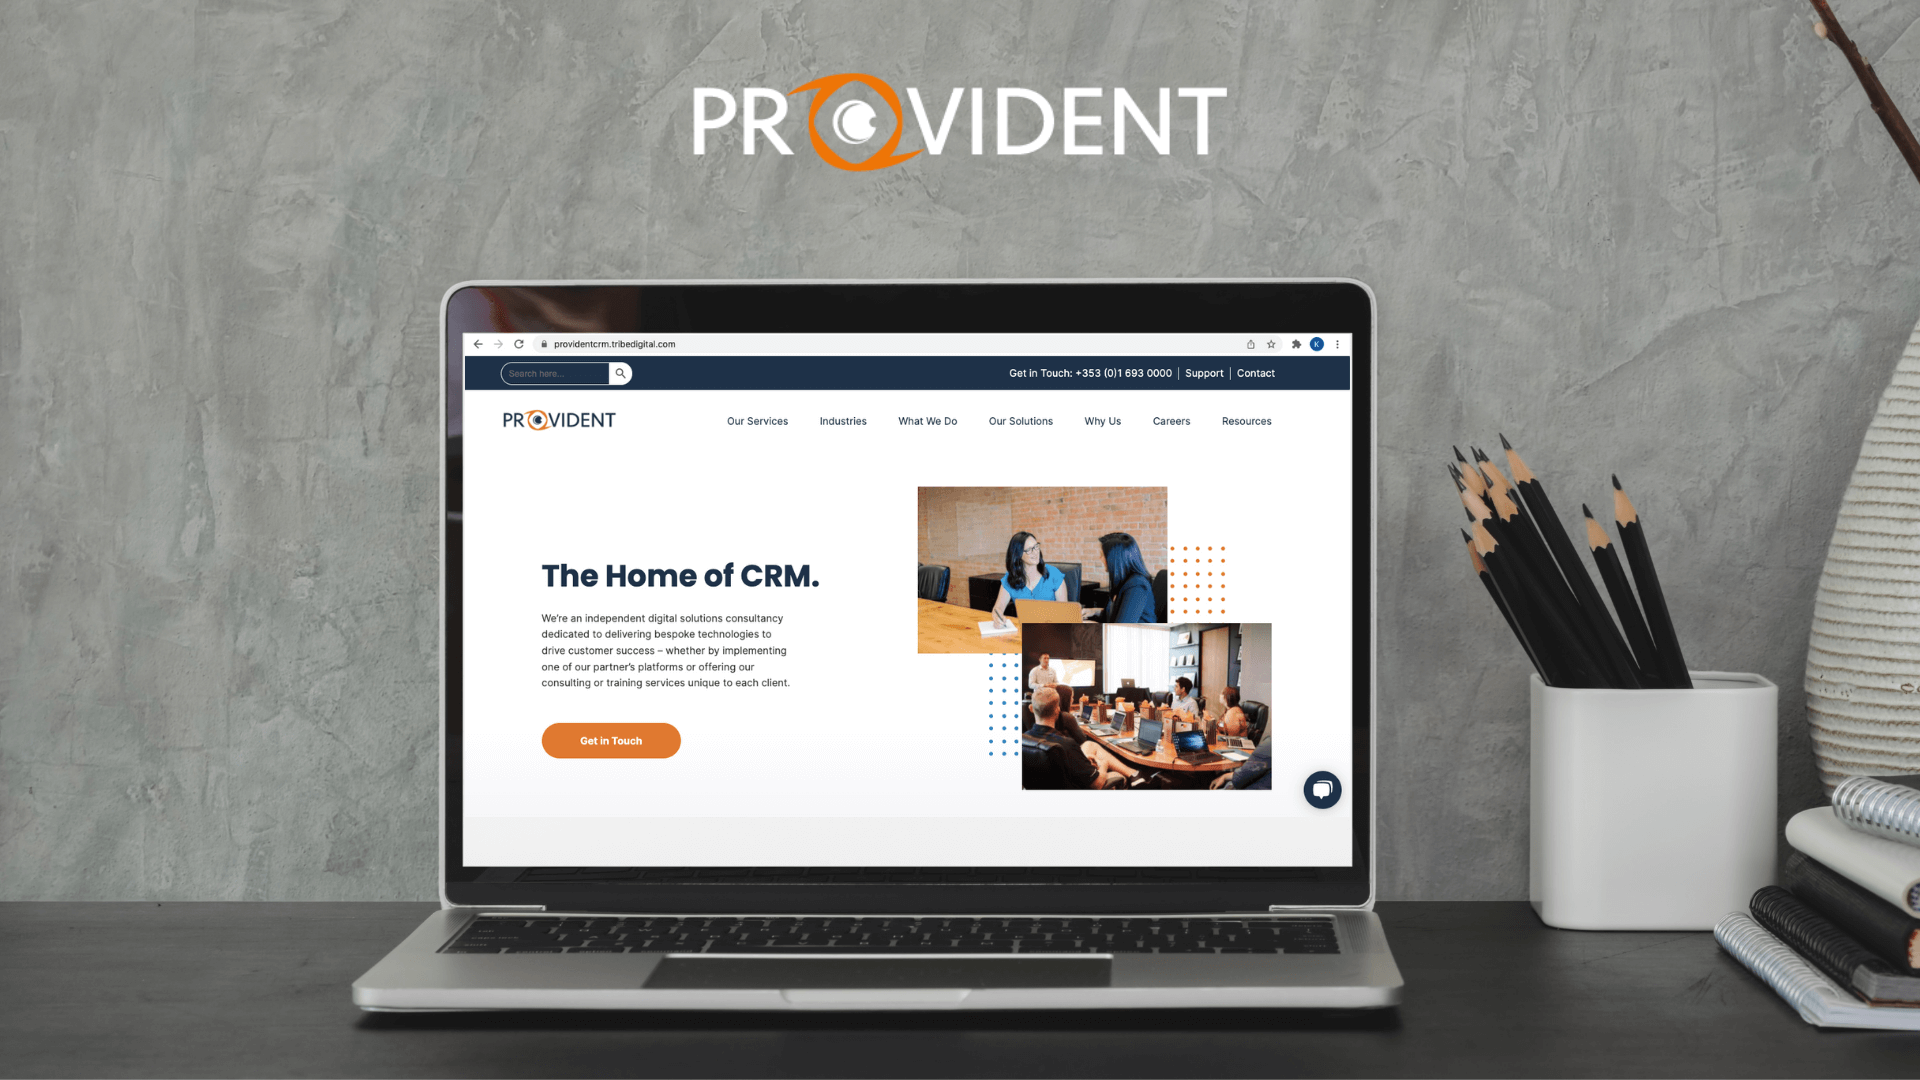 ProvidentCRM-CRM-Launches-New-Website (1)